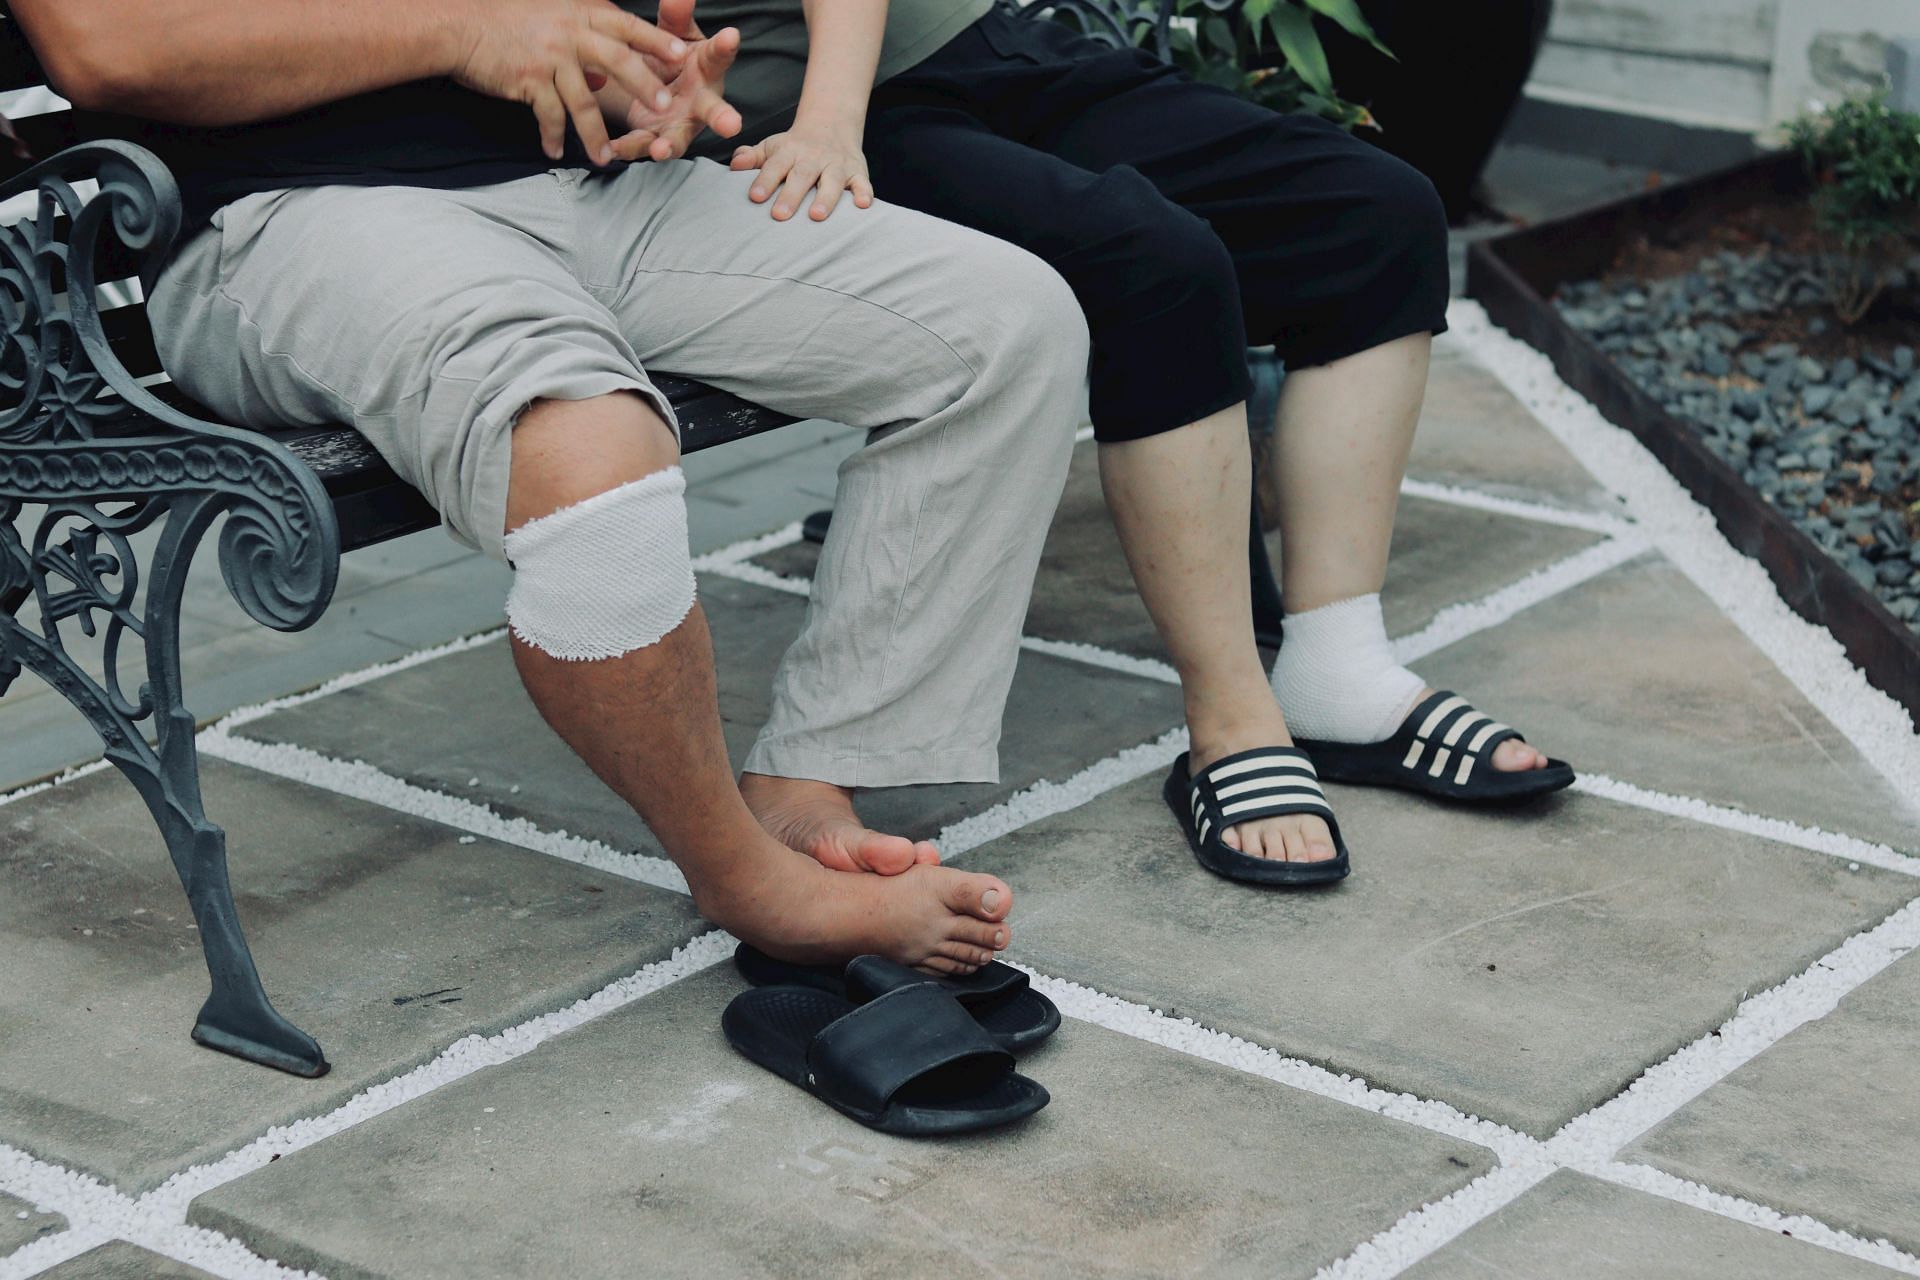 Swollen ankles (image sourced via Pexels / Photo by song ning chan)